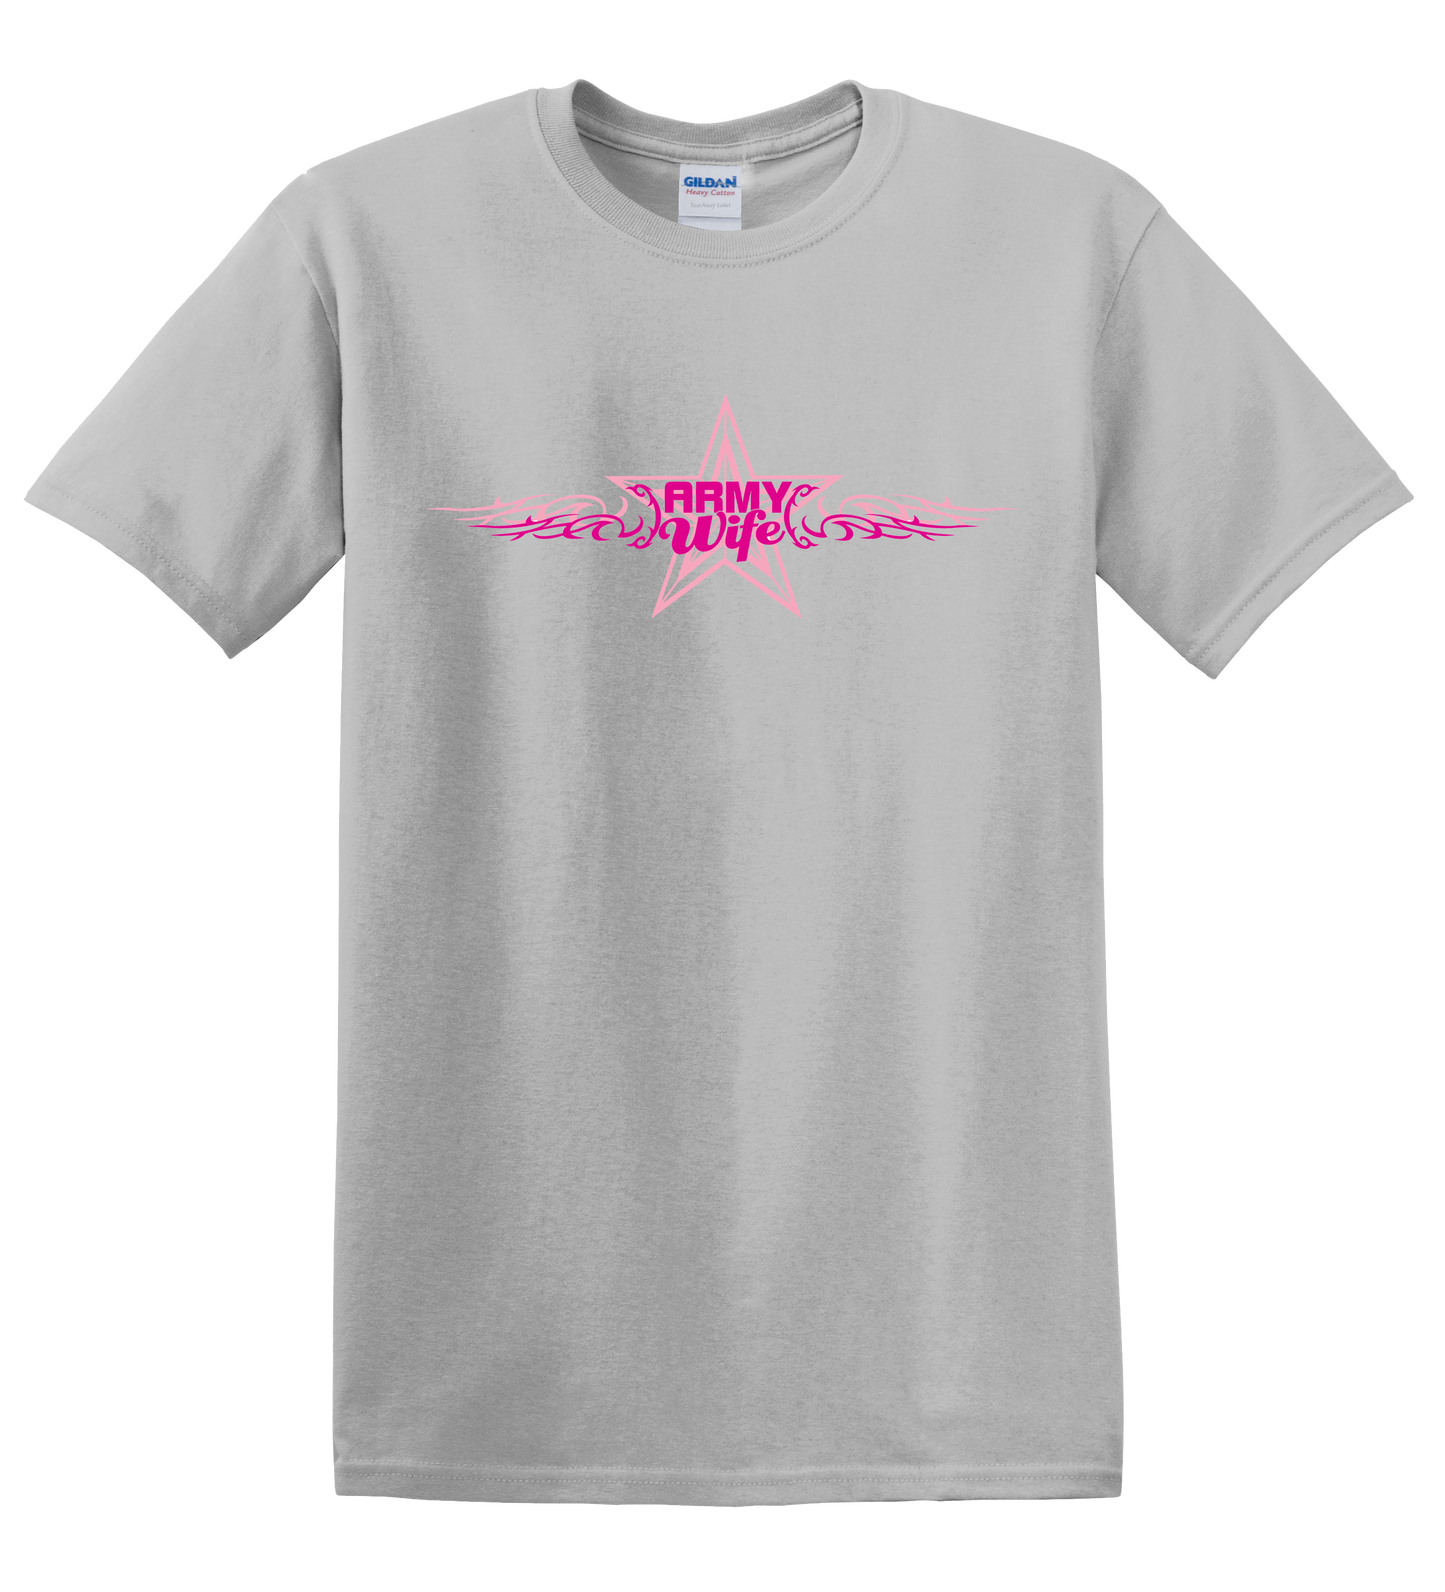 ARMY WIFE over Star Flanked with Scroll Design in PINK on Grey T Shirt